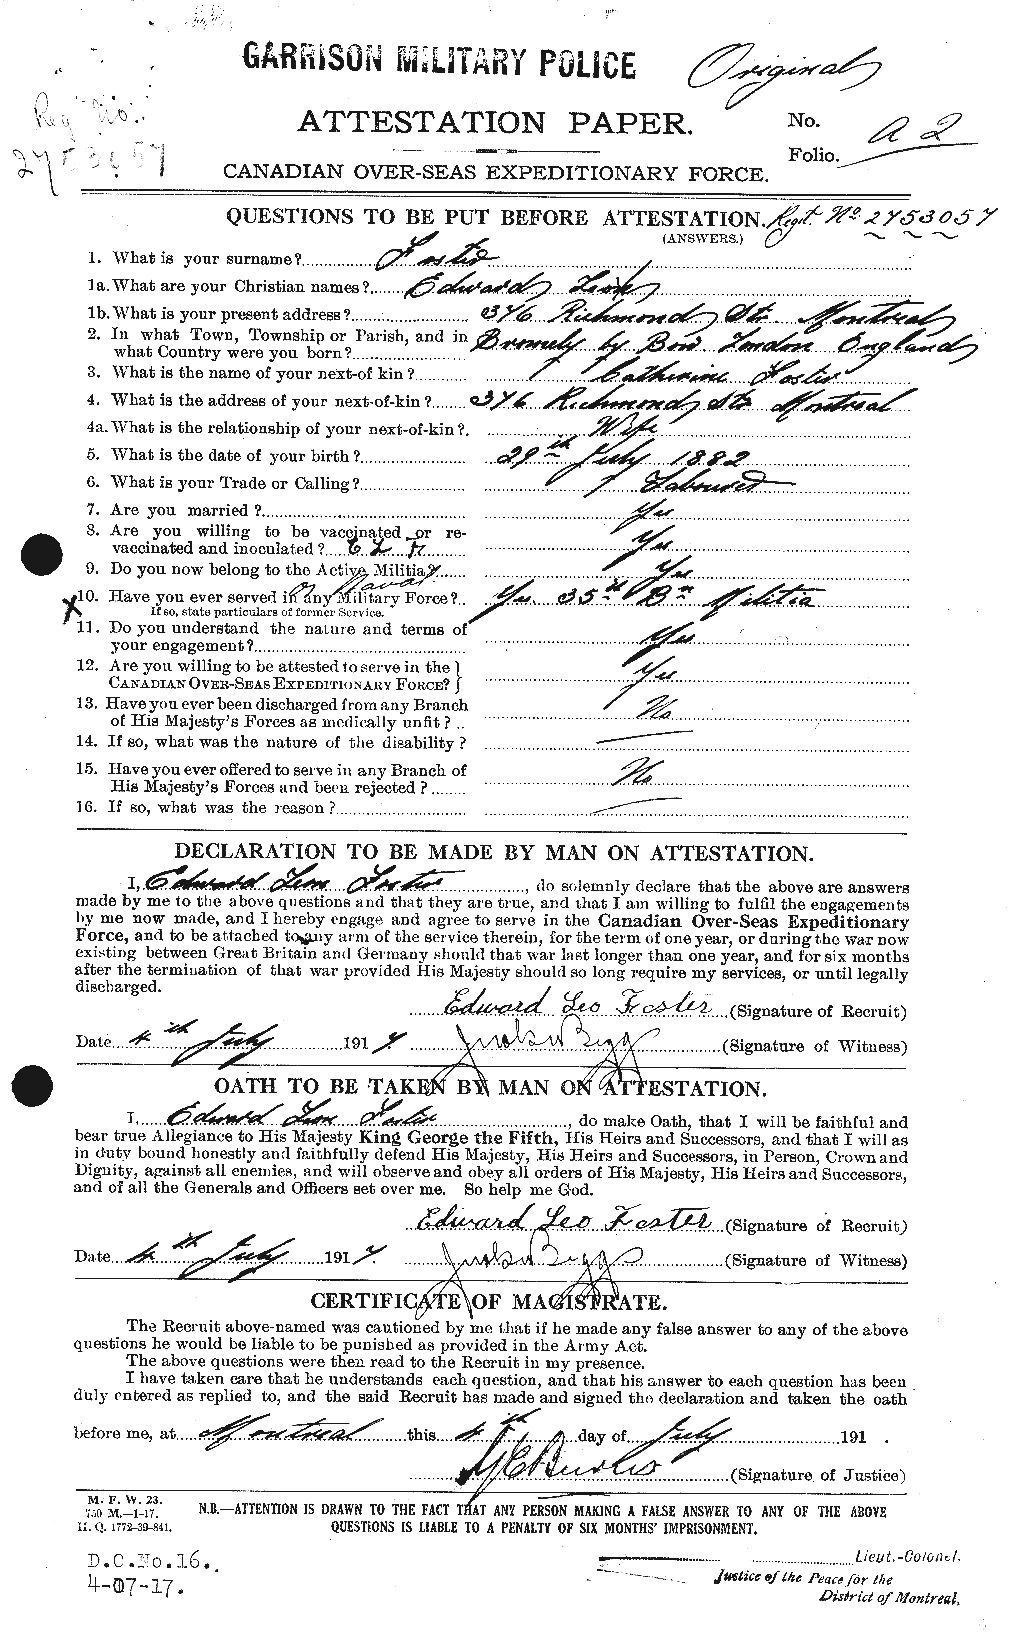 Personnel Records of the First World War - CEF 330584a